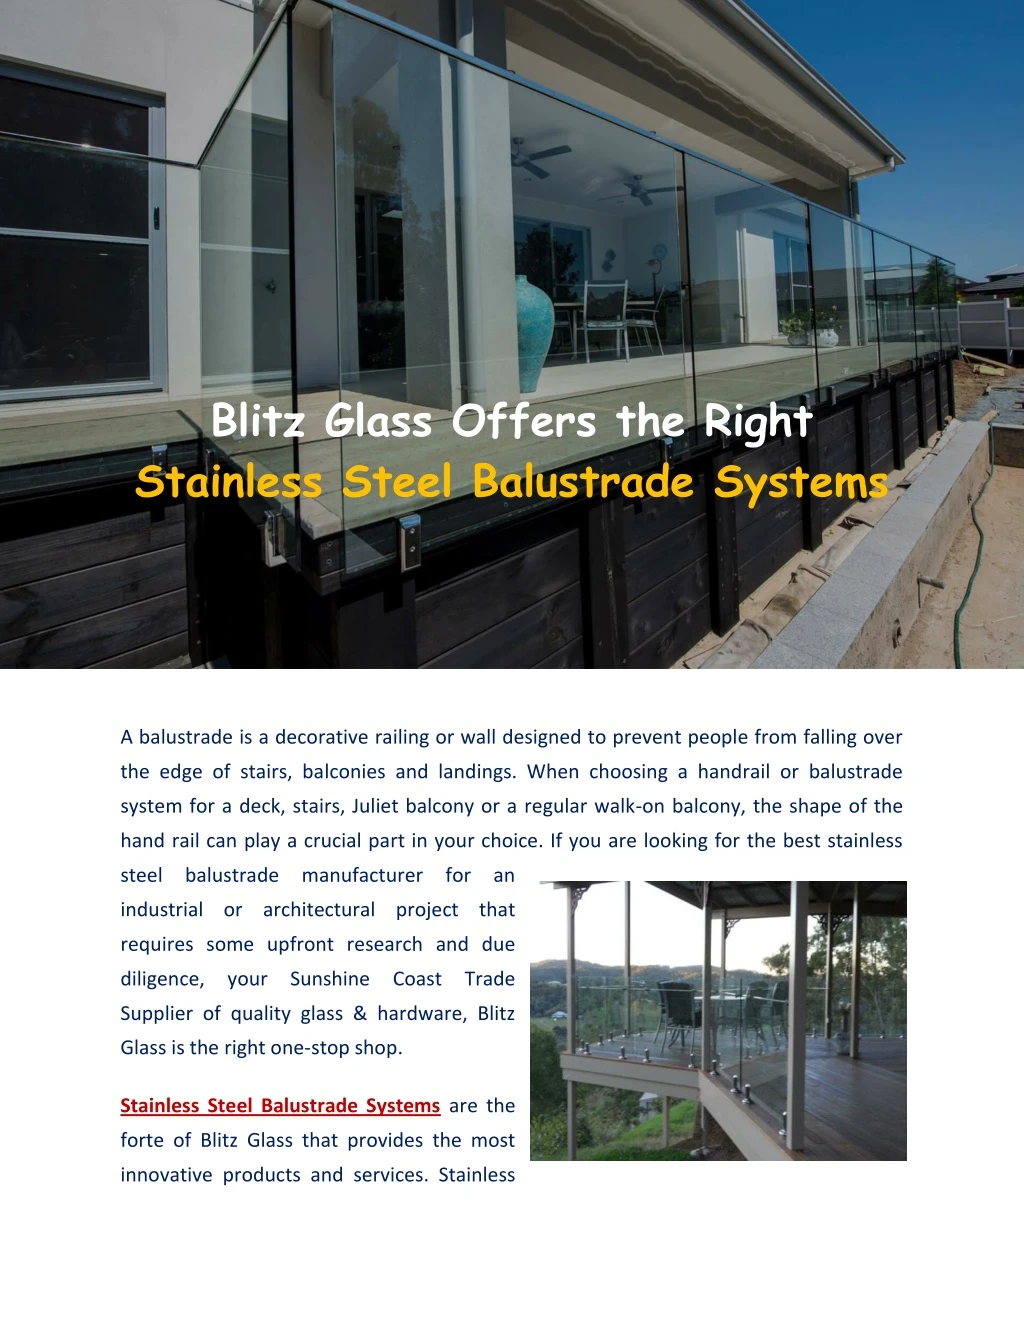 blitz glass offers the right stainless steel